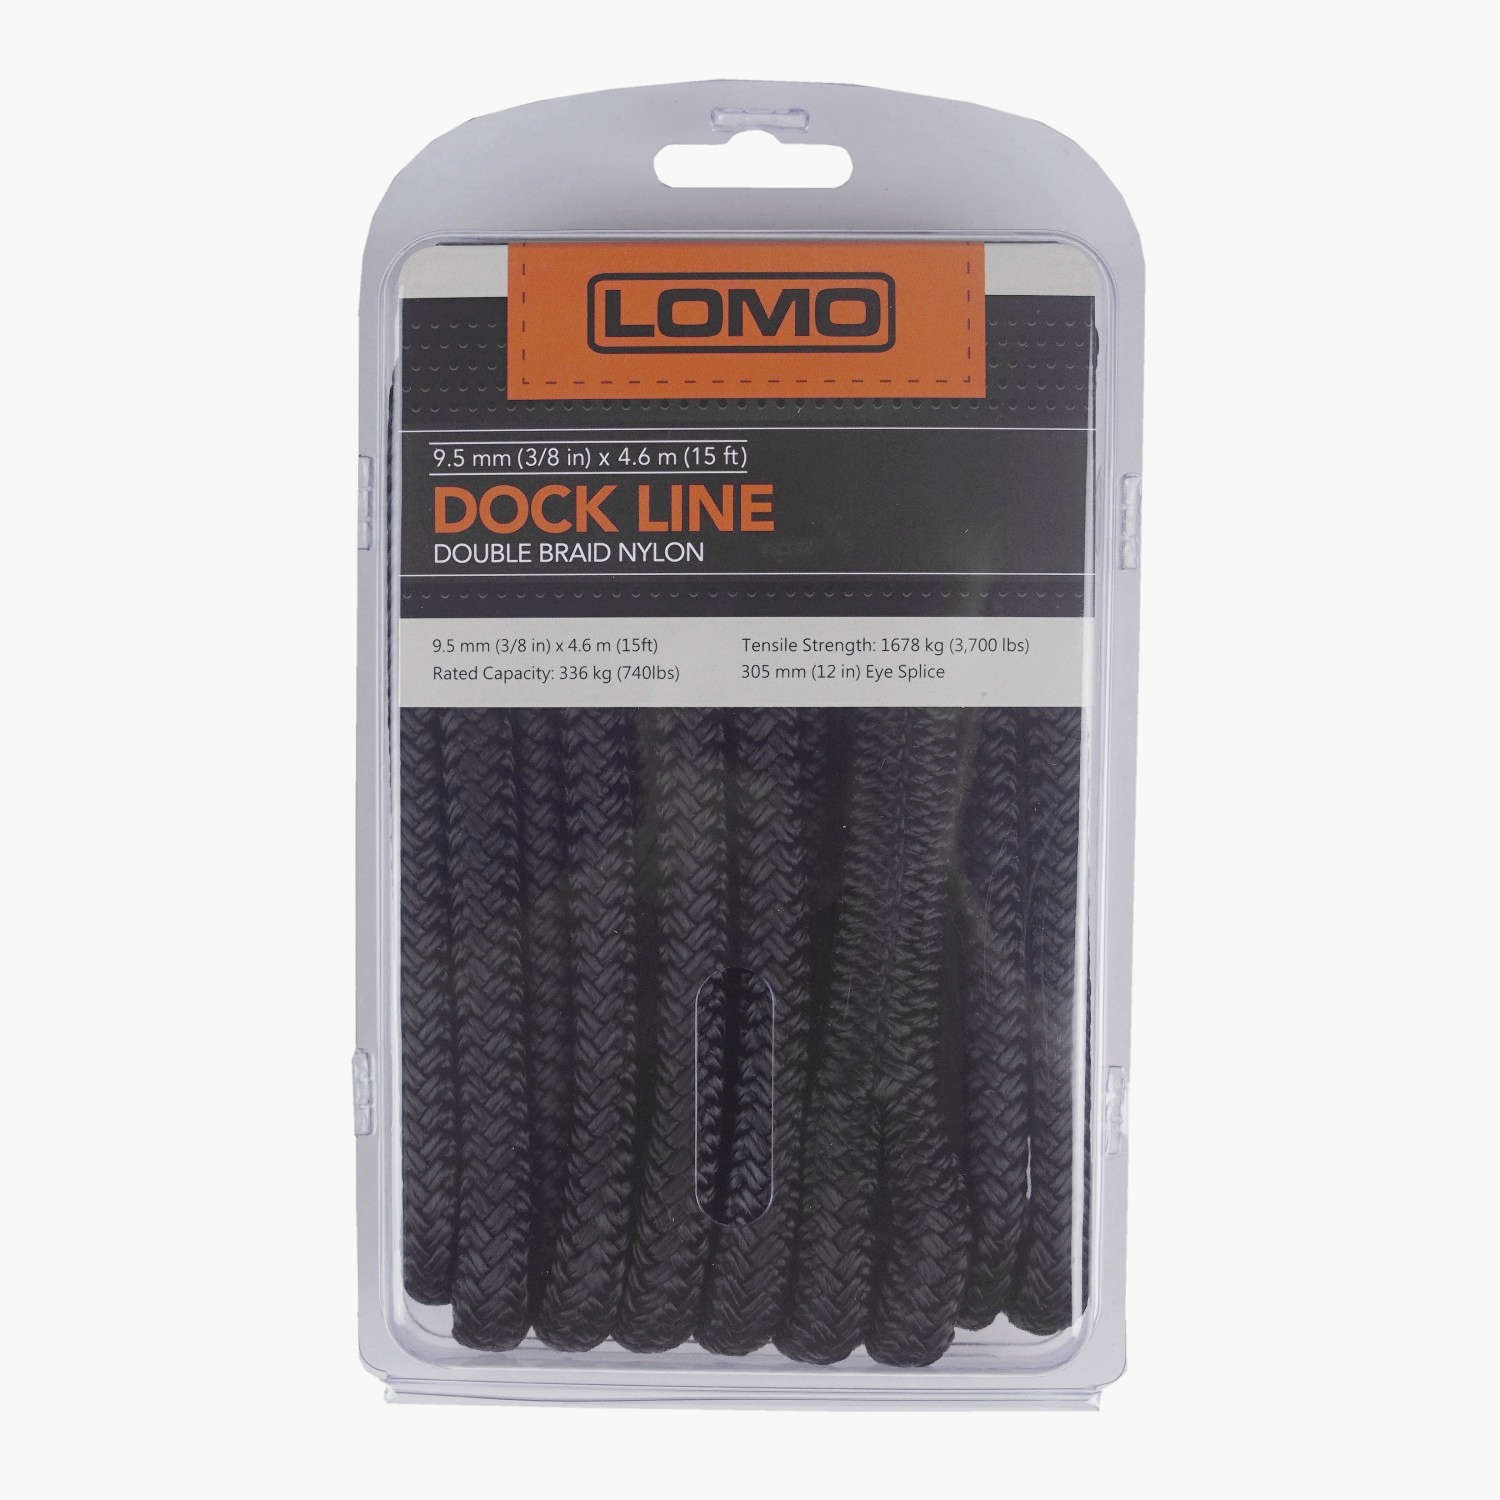 Dock Line / Mooring Line, 3/8 9.5mm x 15ft 4.6m Double Braided